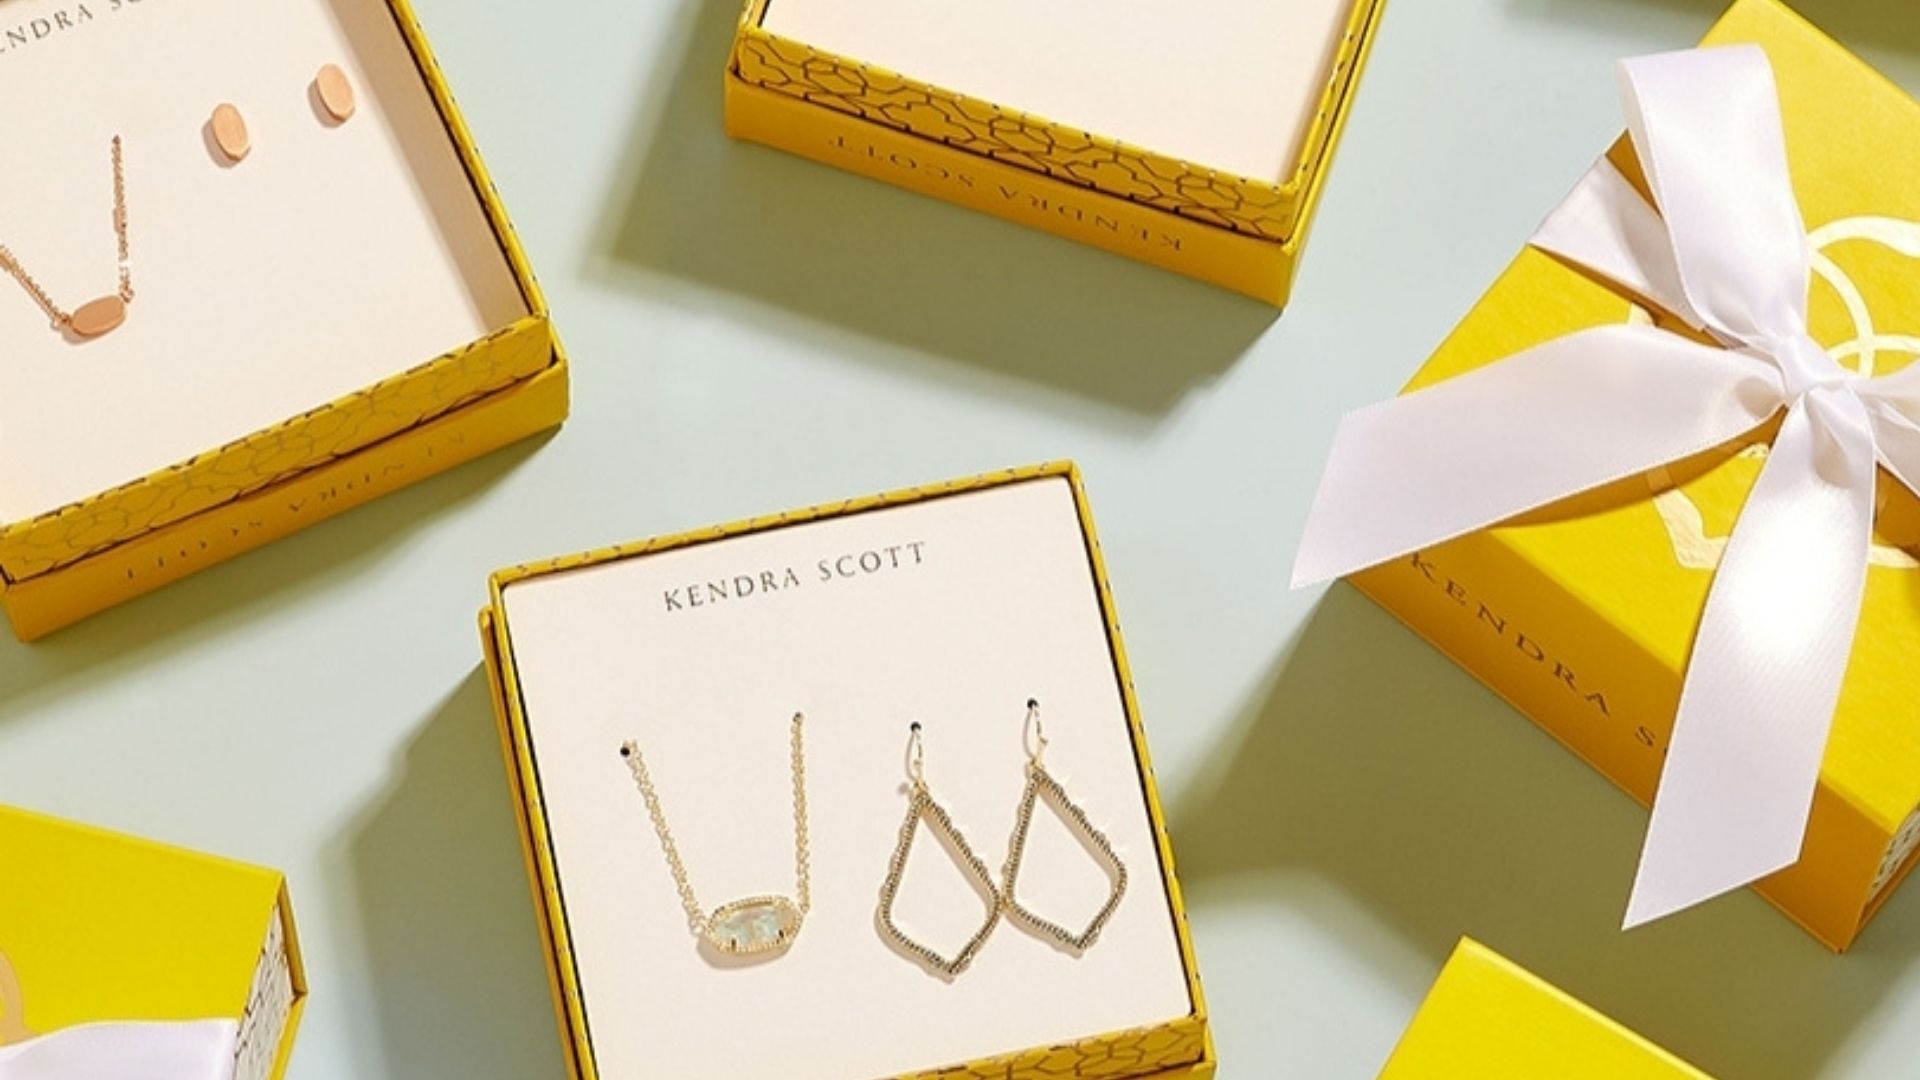 Kendrascott Shop: The Best Place for Personalized Gifts